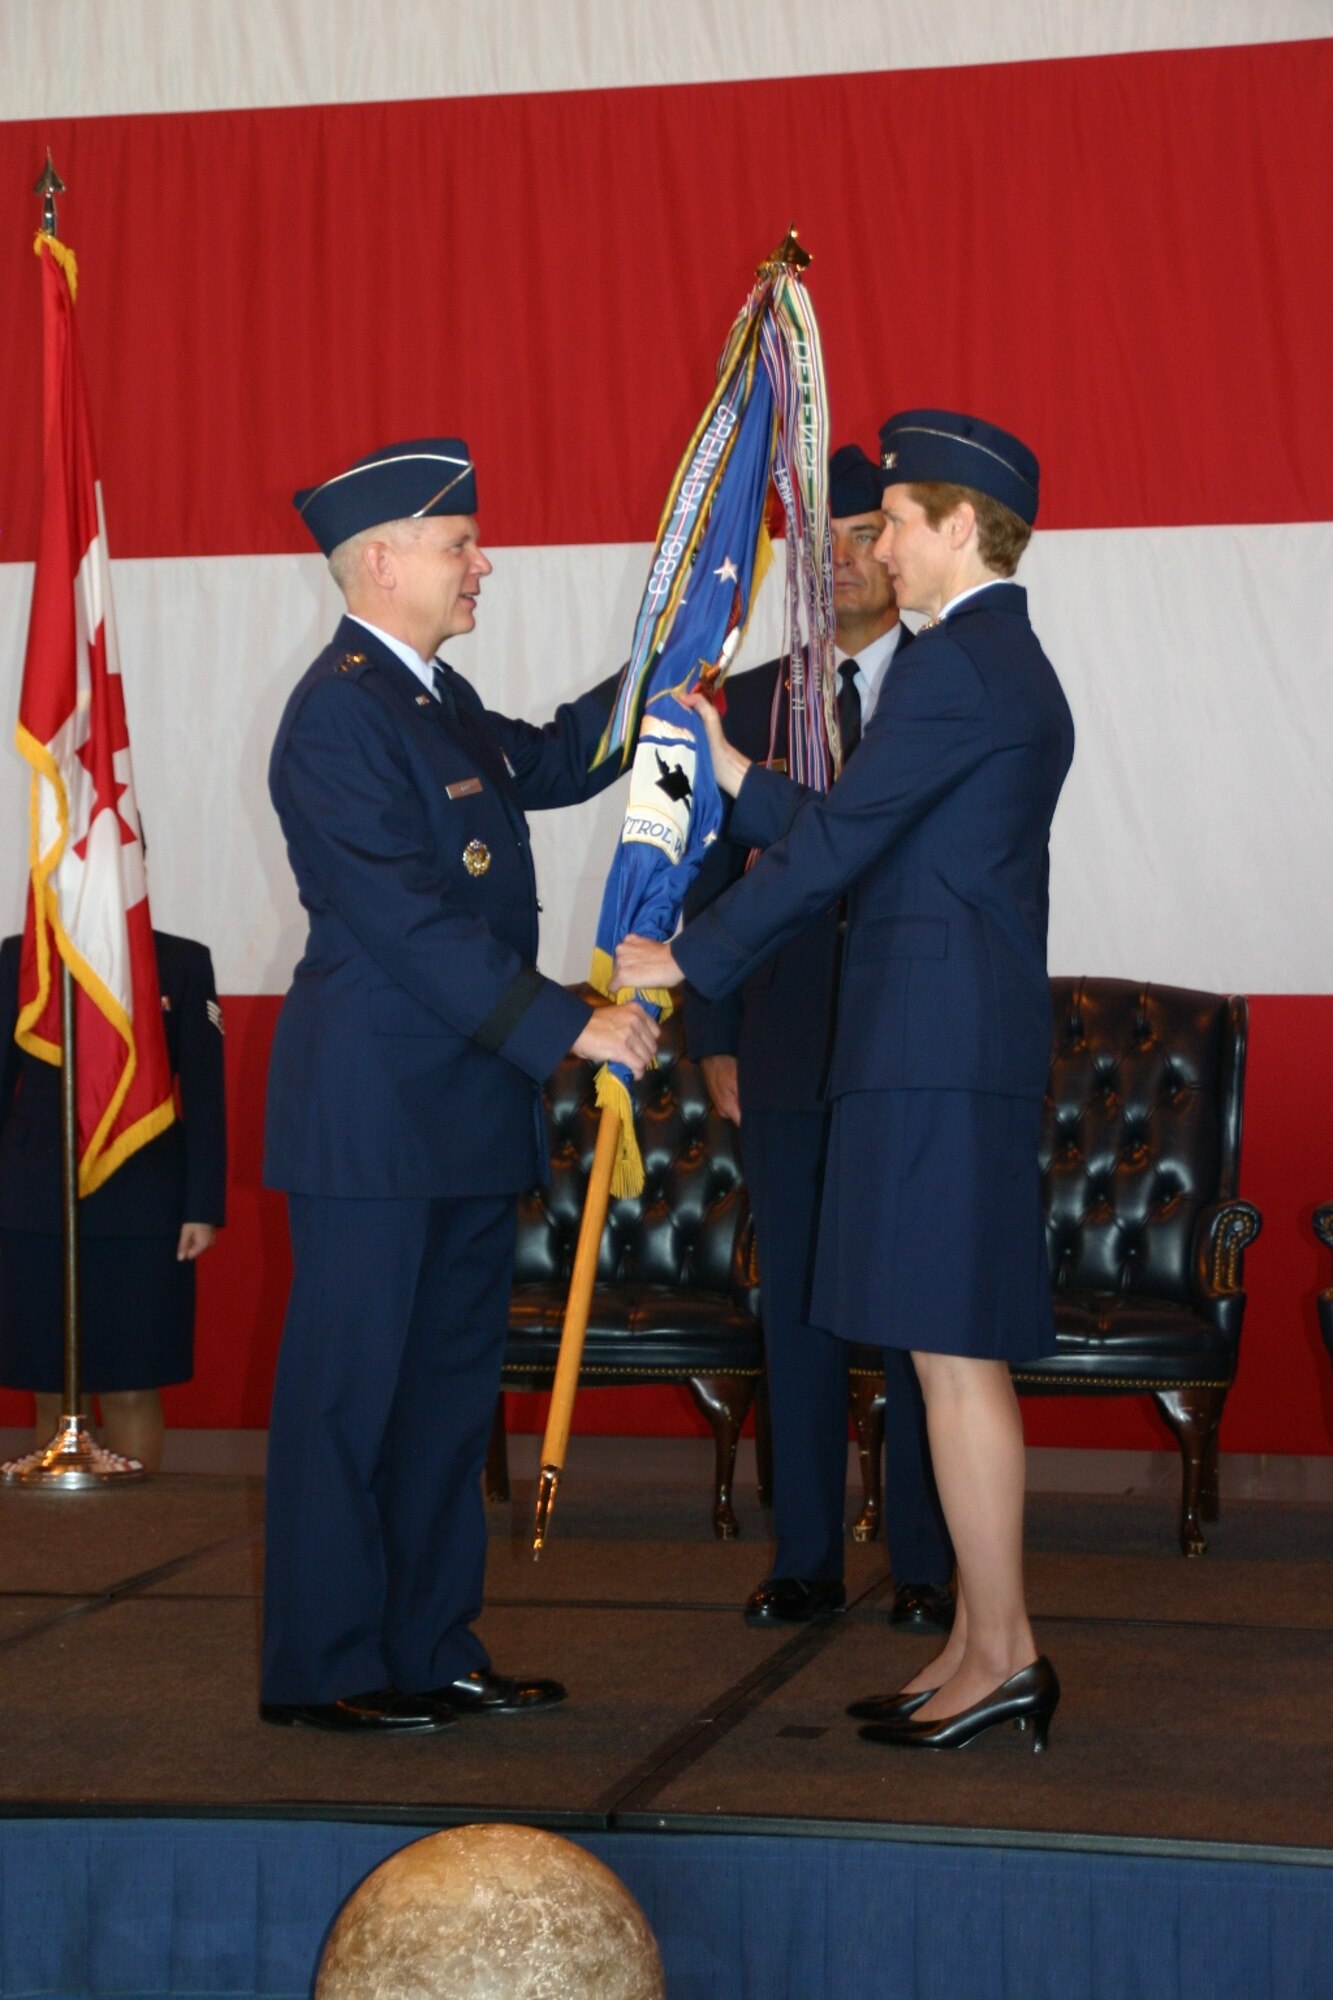 Lt. Gen. Robert Elder, Commander, 8th Air Force, passes the flag, and command of the 552nd Air Control Wing to Col. Patricia Hoffman in a change of command ceremony August 27th. Photo Courtesy of 2nd Lt. Kinder Blacke.